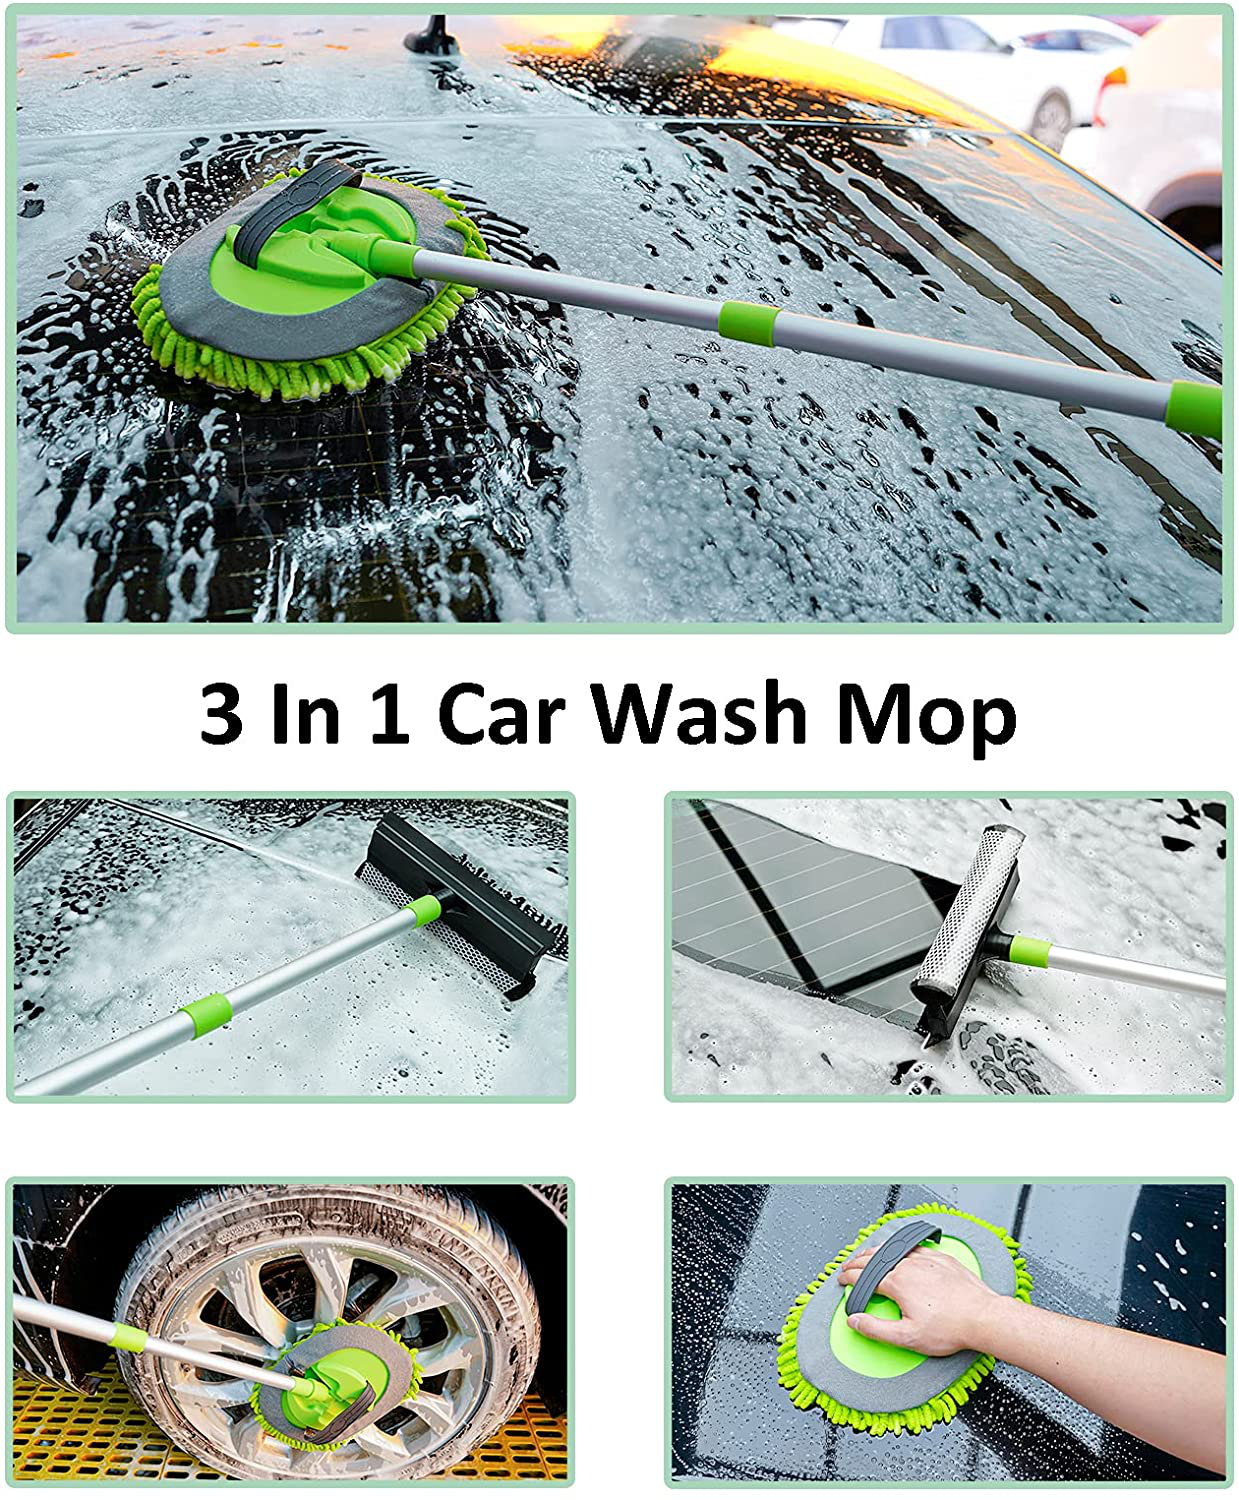 FORCAR 15pcs Car Cleaning Kit, Car Wash Brush Mop with 43" Long Handle, Chenille Microfiber Mitt, Extendable Long Pole Window Water Scraper for Interior and Exterior Car Detailing Kit